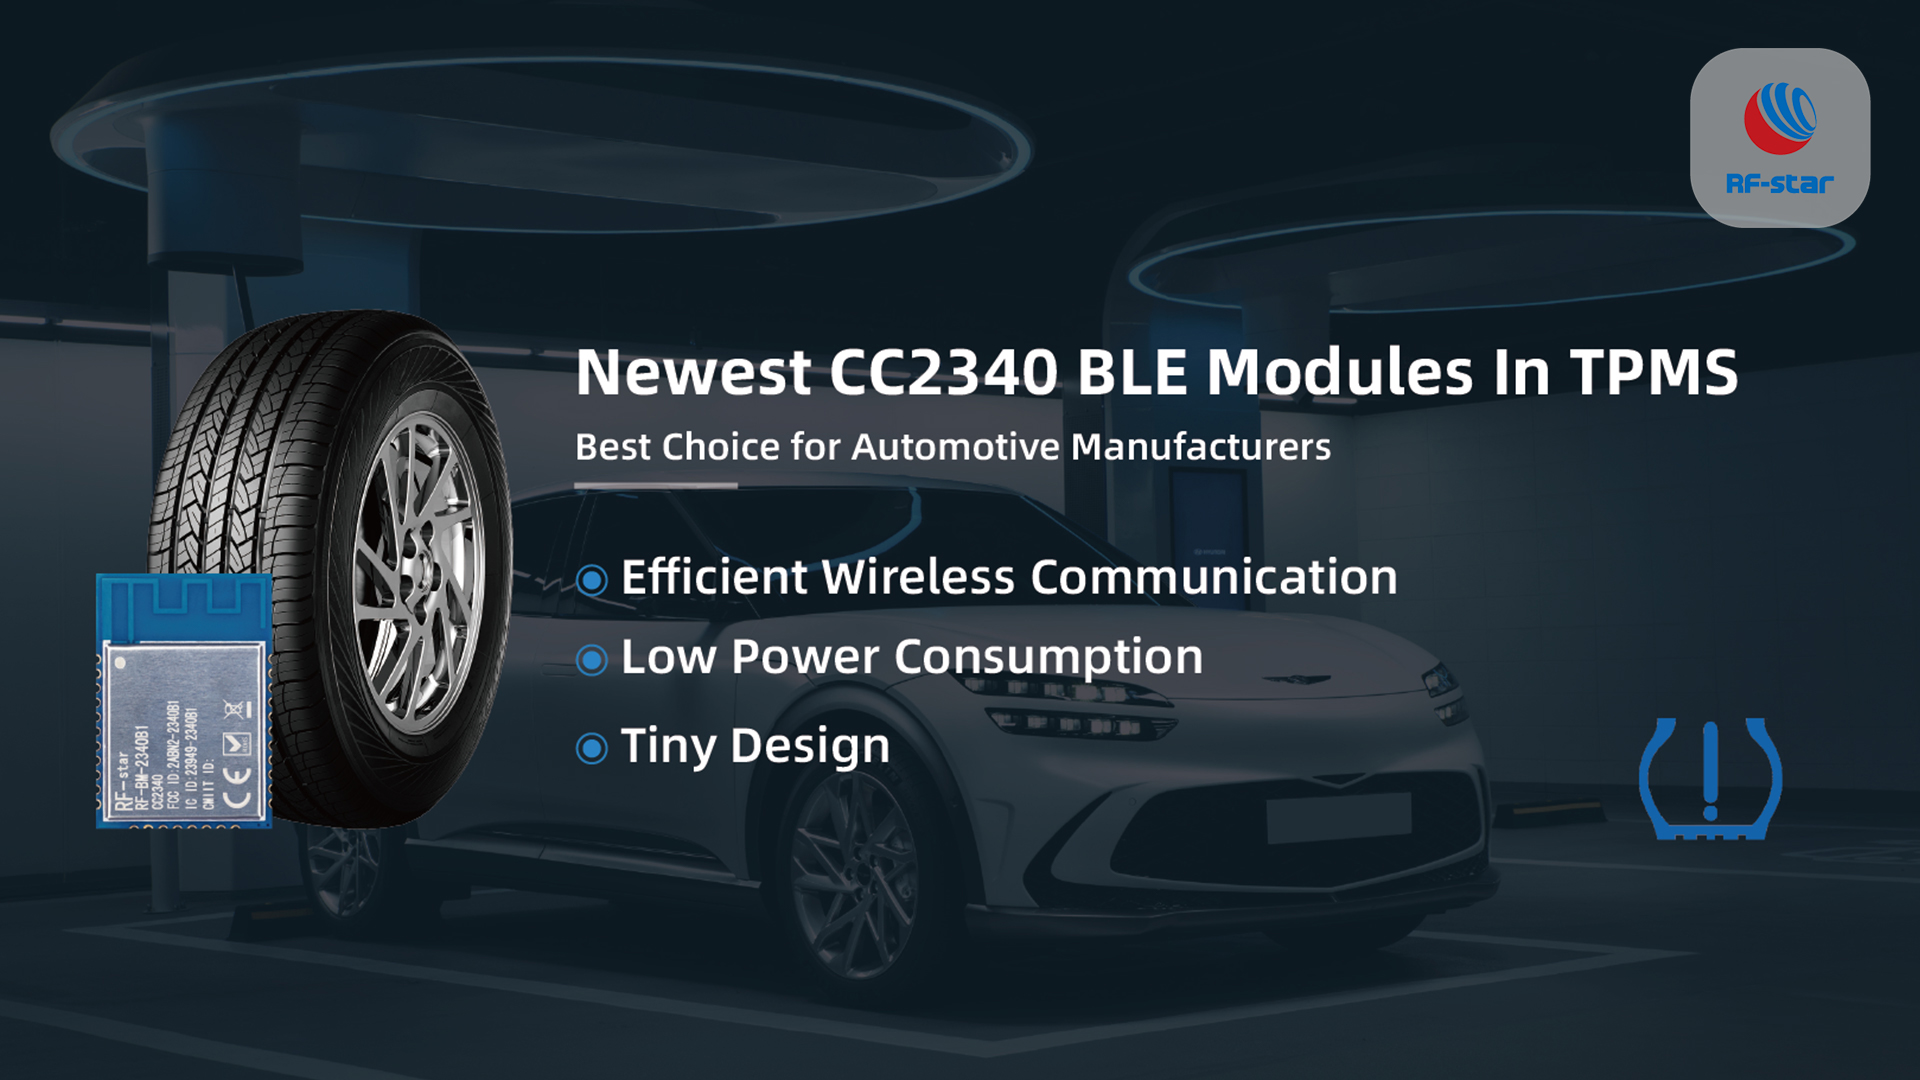 Why are CC2340 BLE modules outstanding in TPMS